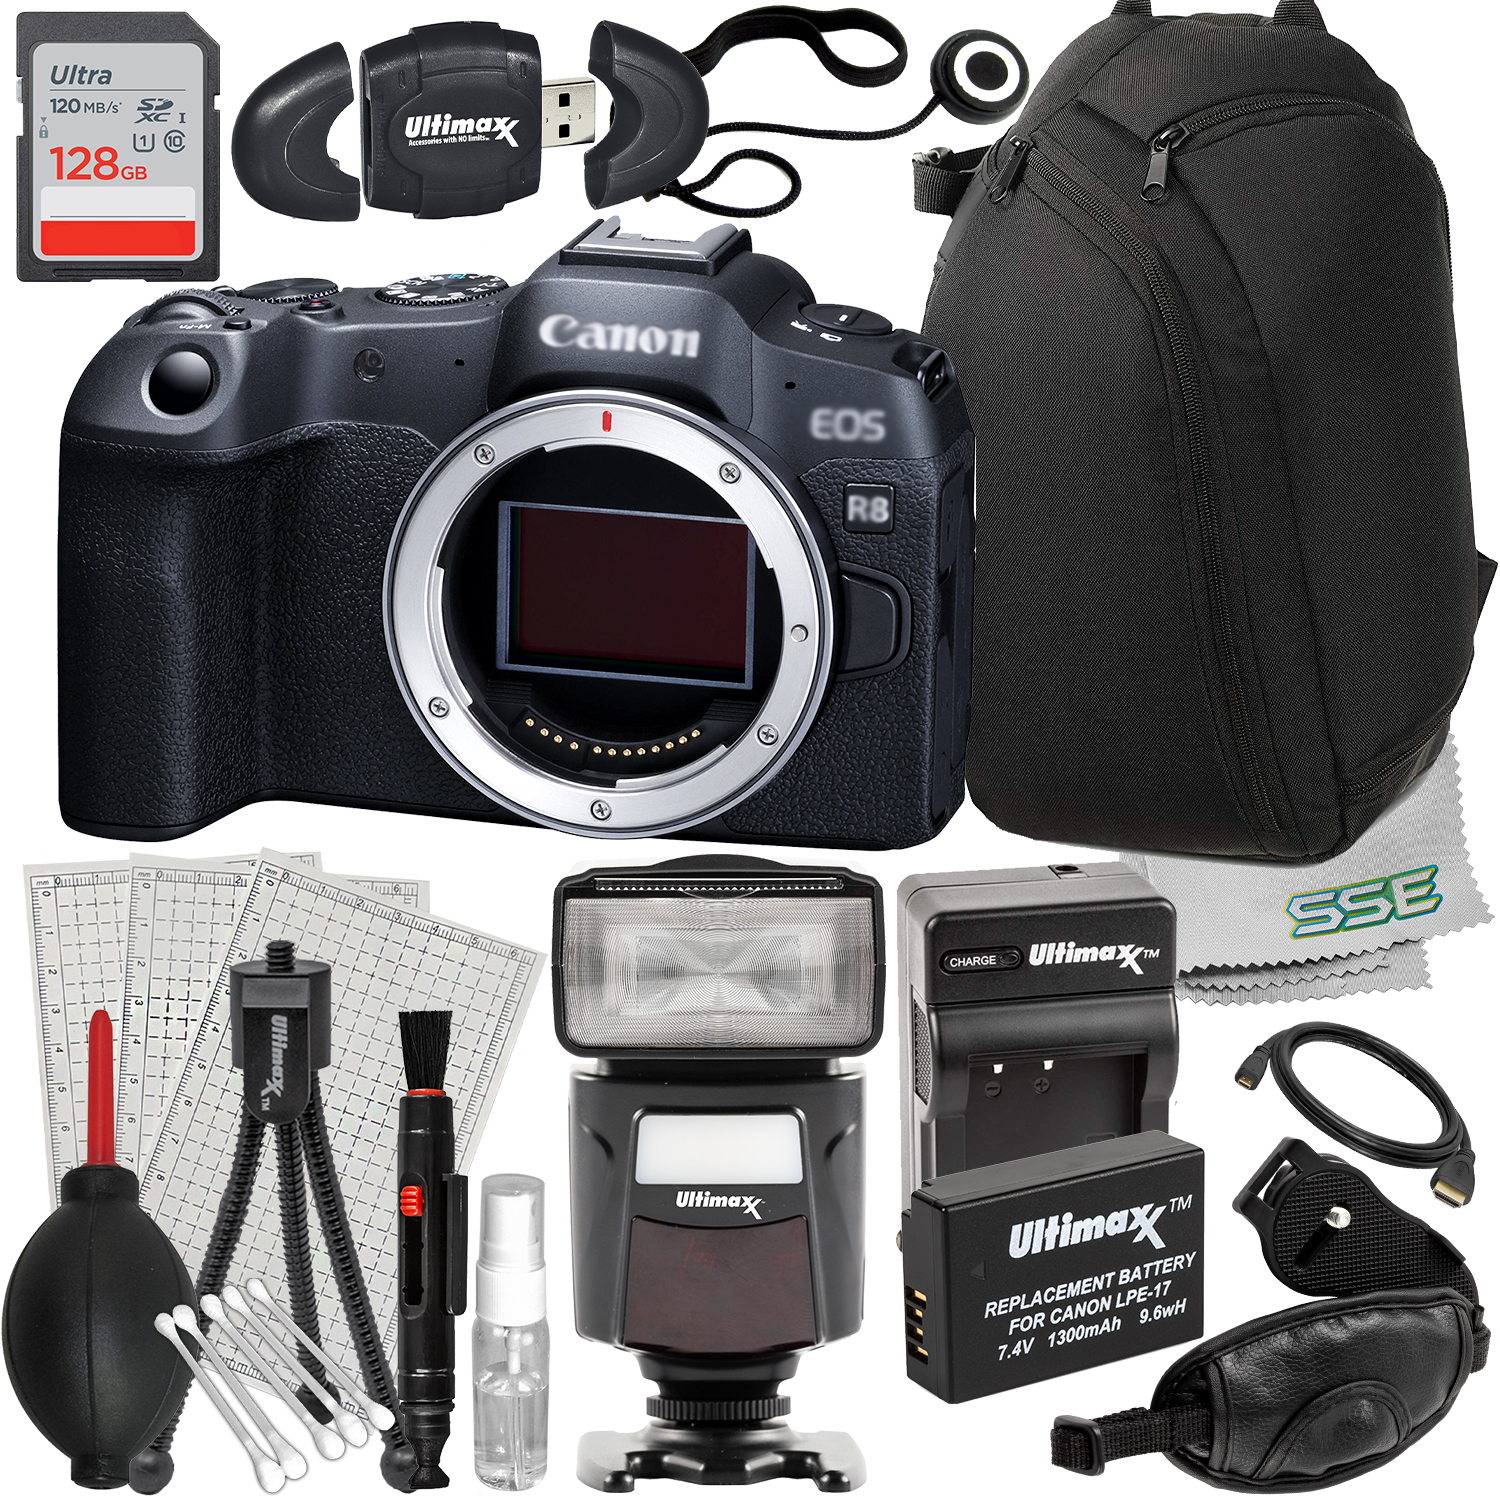  Canon EOS R8 Mirrorless Camera Bundle (Body Only) - Includes: 128GB Ultra SDXC, Universal Speedlite, Replacement Battery & Much More (22pc Bundle)